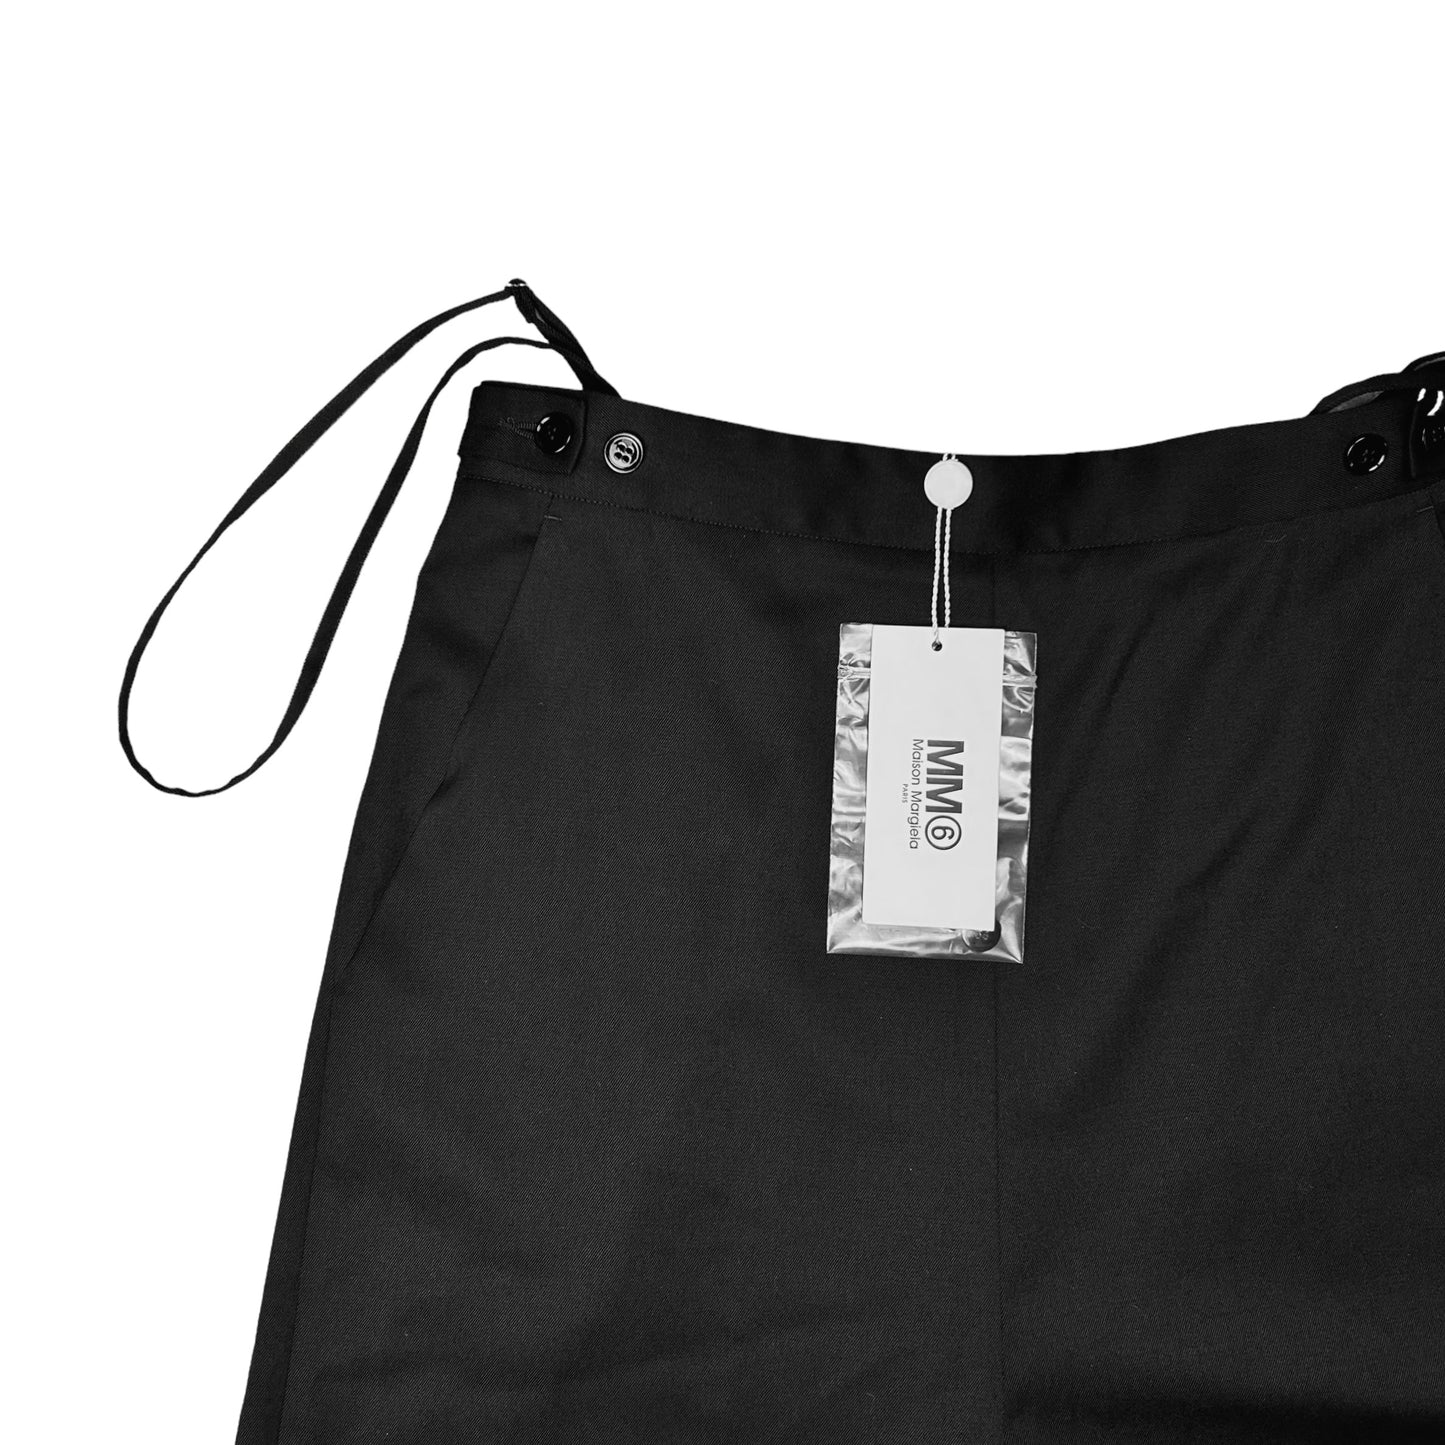 Maison Margiela MM6 Wide Suspender Strap Trousers - AW19